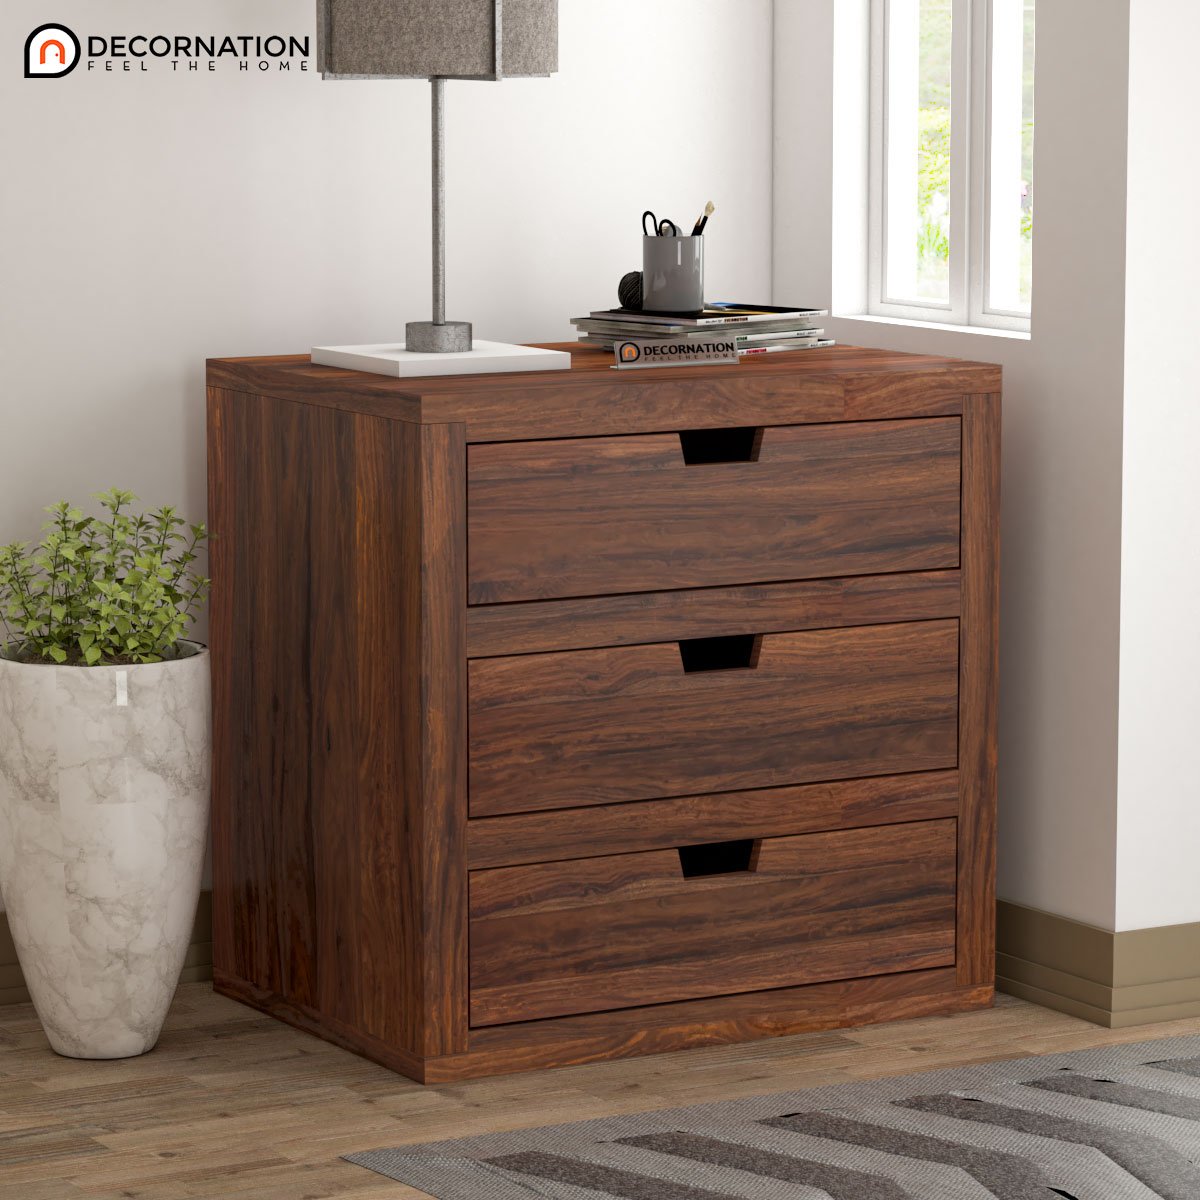 Jacey Wooden Drawer Storage Bedroom Chest of Drawers – Natural Finish